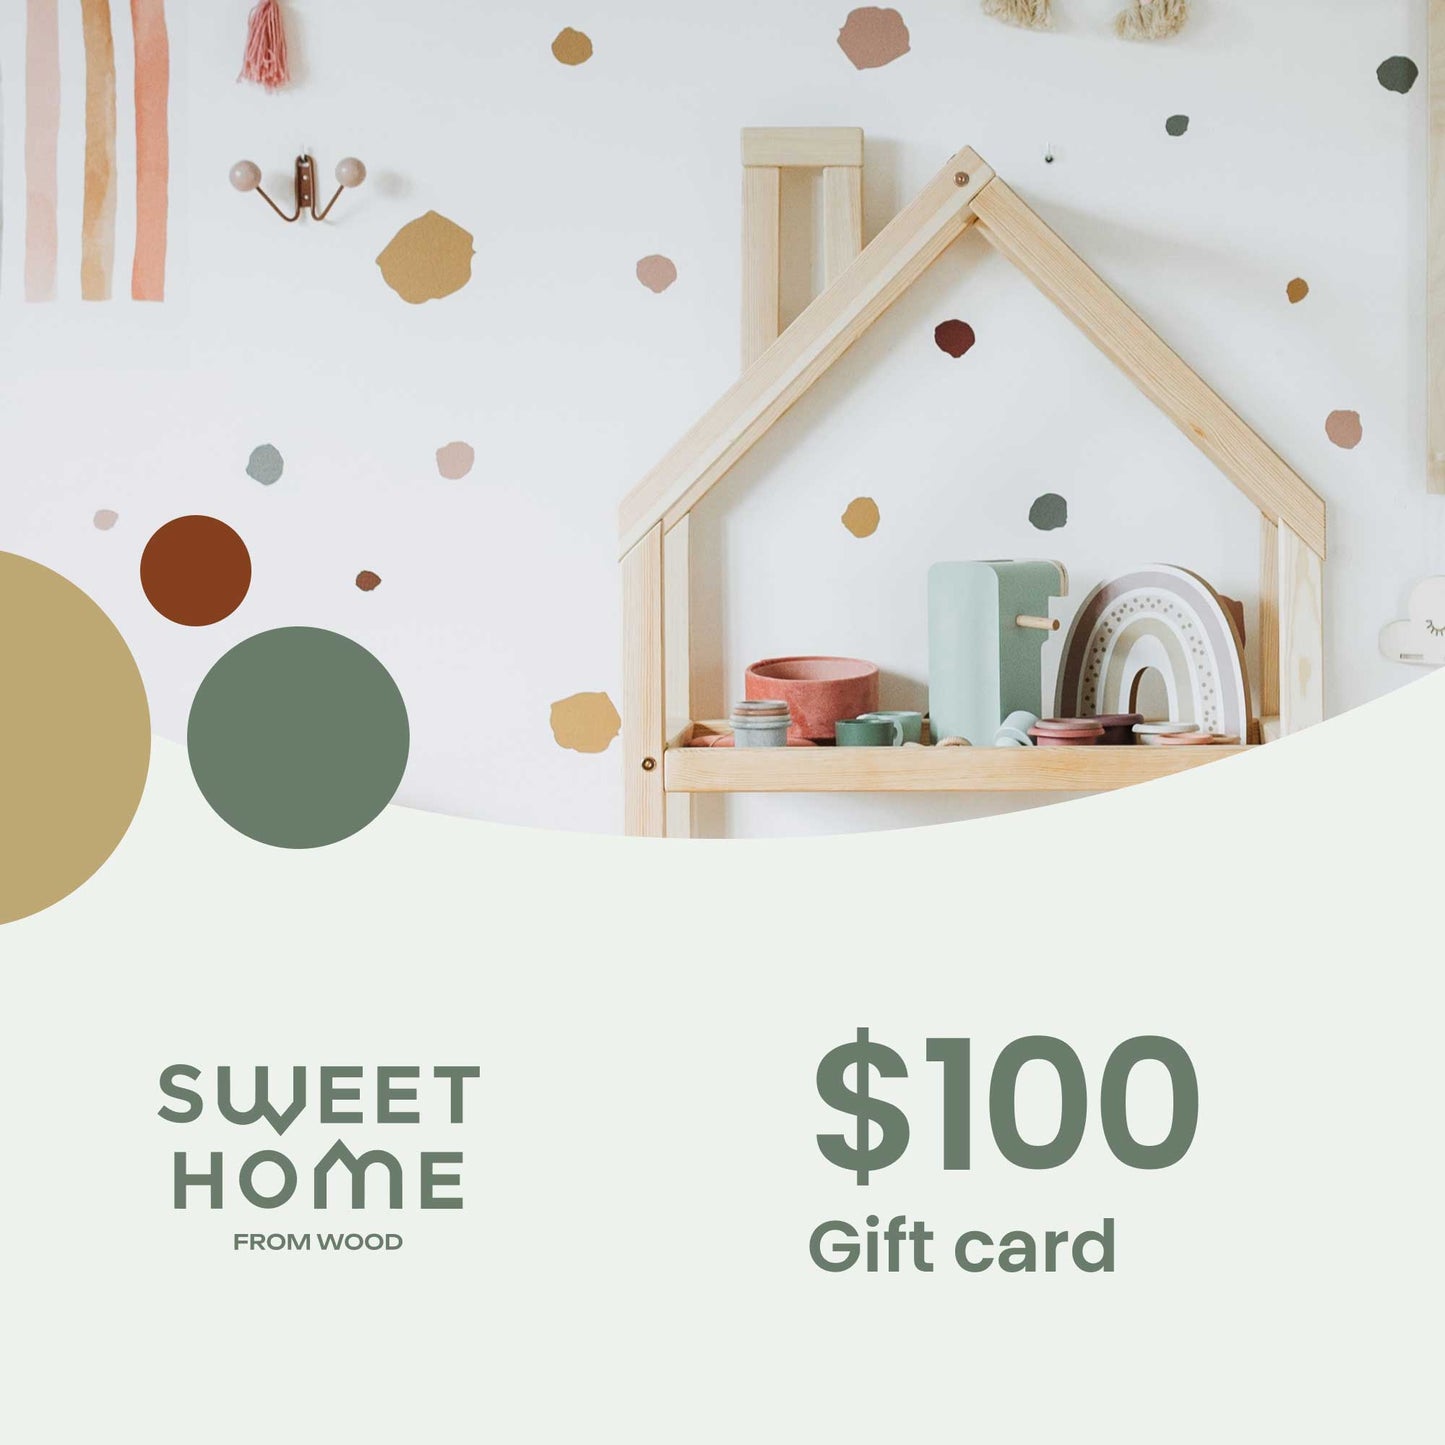 Gift card featuring a $100 USD value, ready for purchase or gifting.